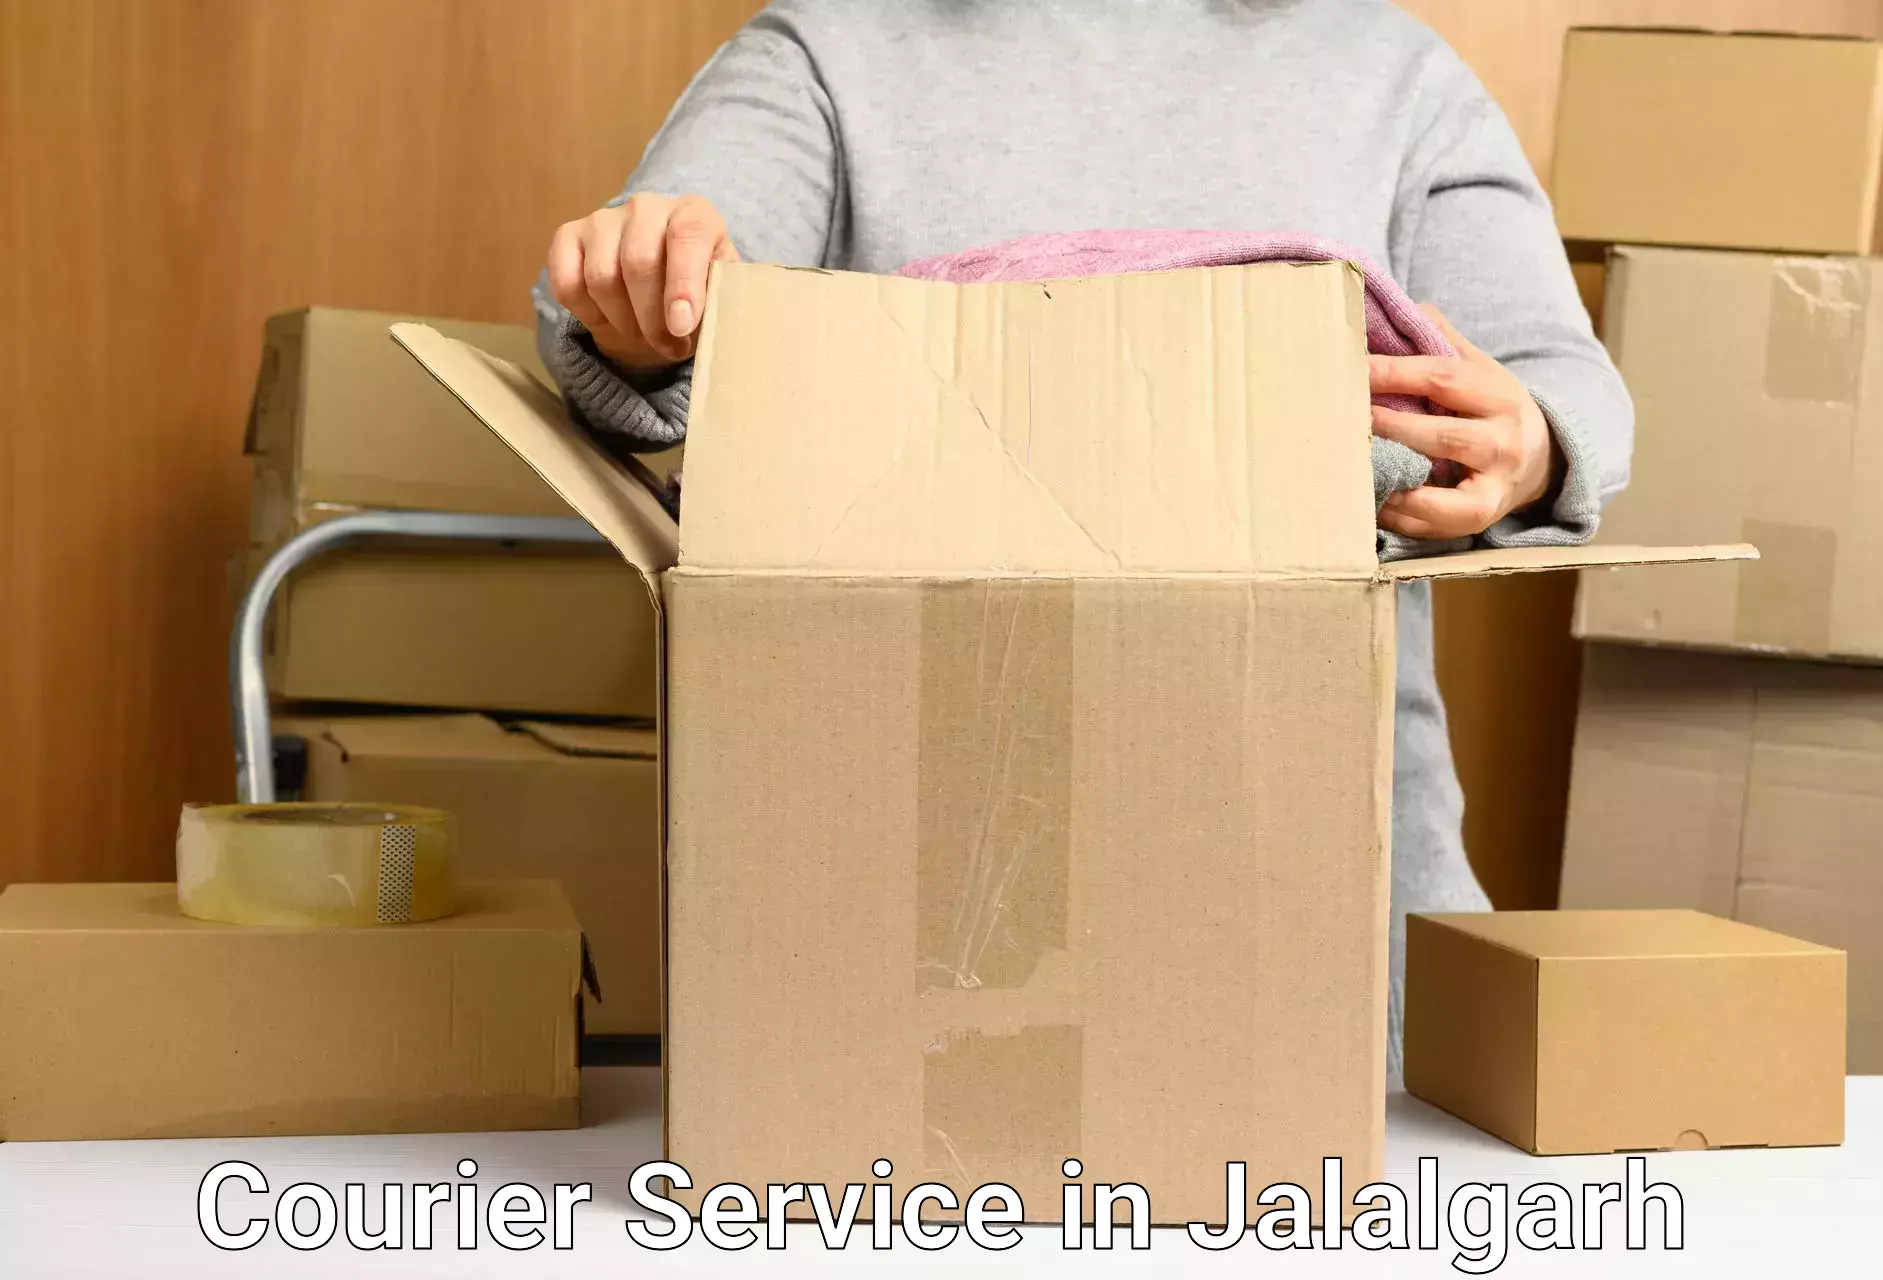 Customer-oriented courier services in Jalalgarh